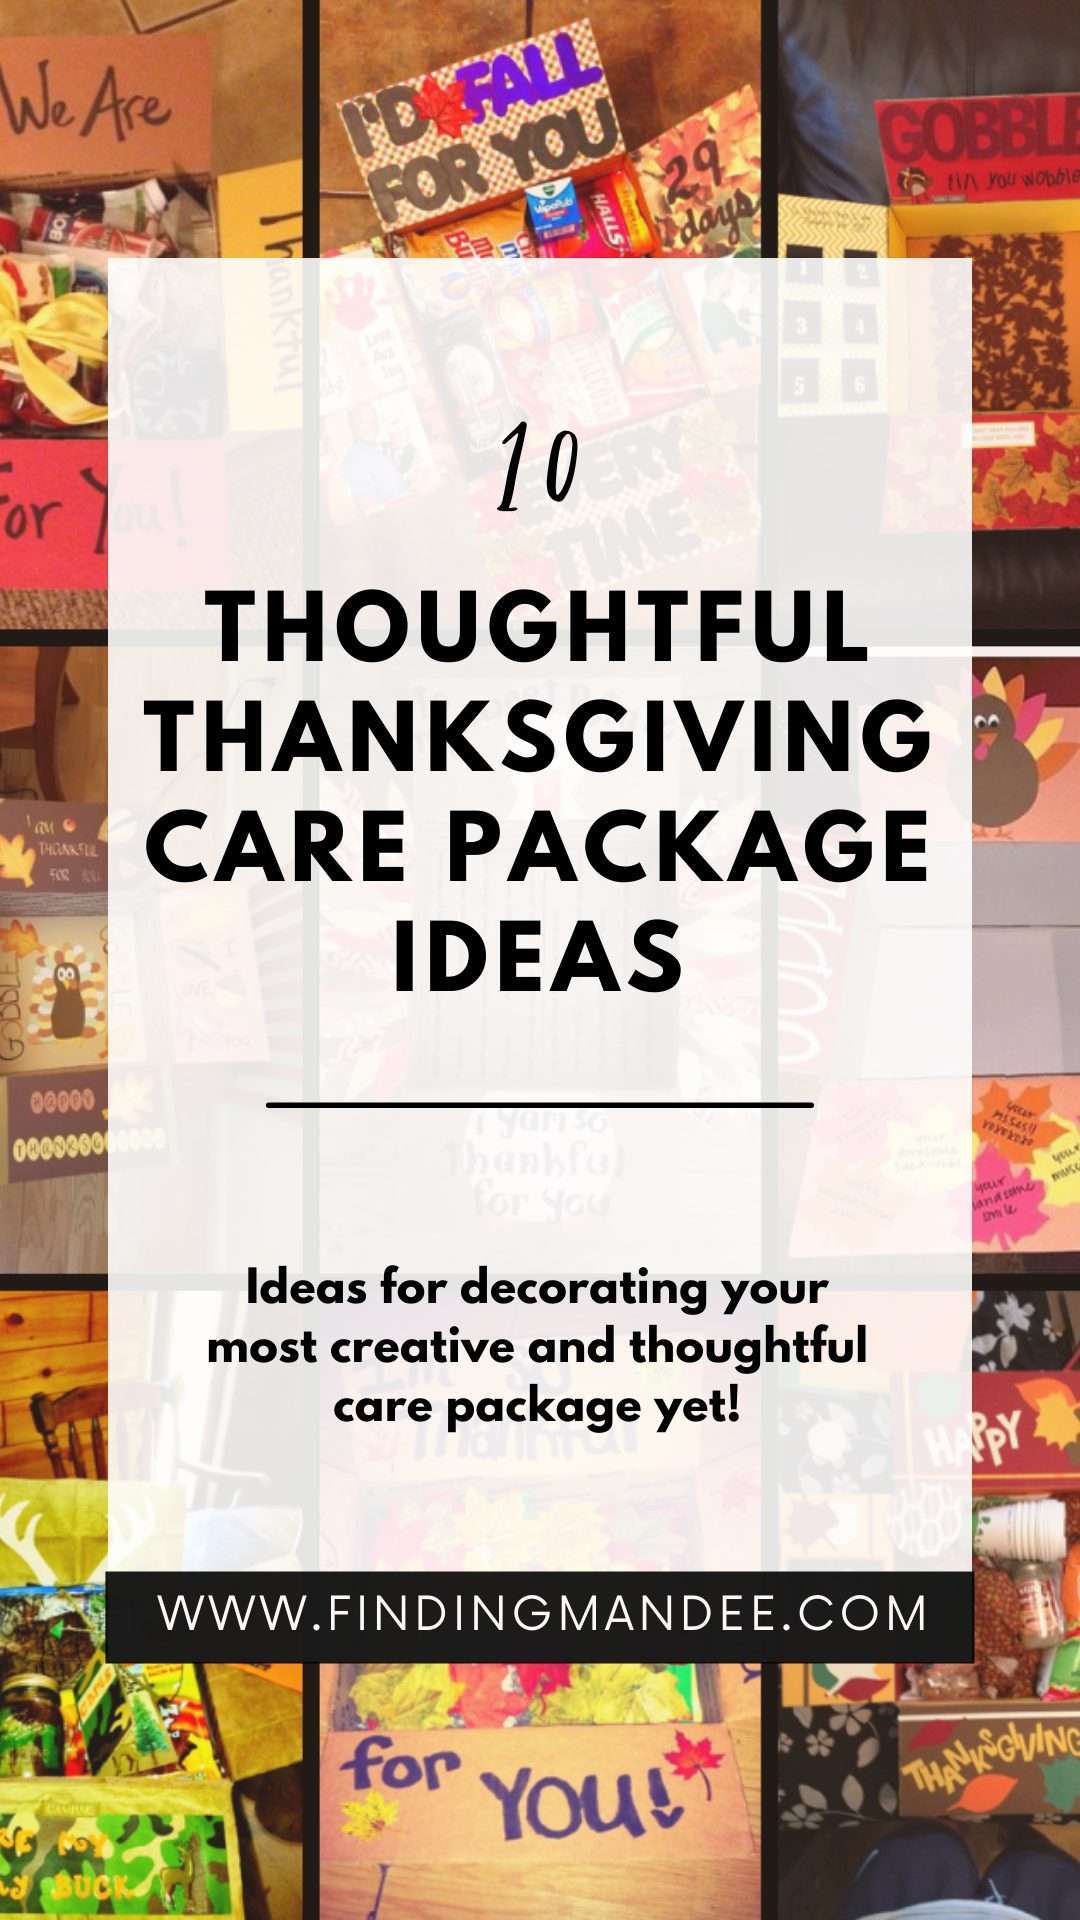 10 Thoughtful Thanksgiving Care Package Ideas | Finding Mandee